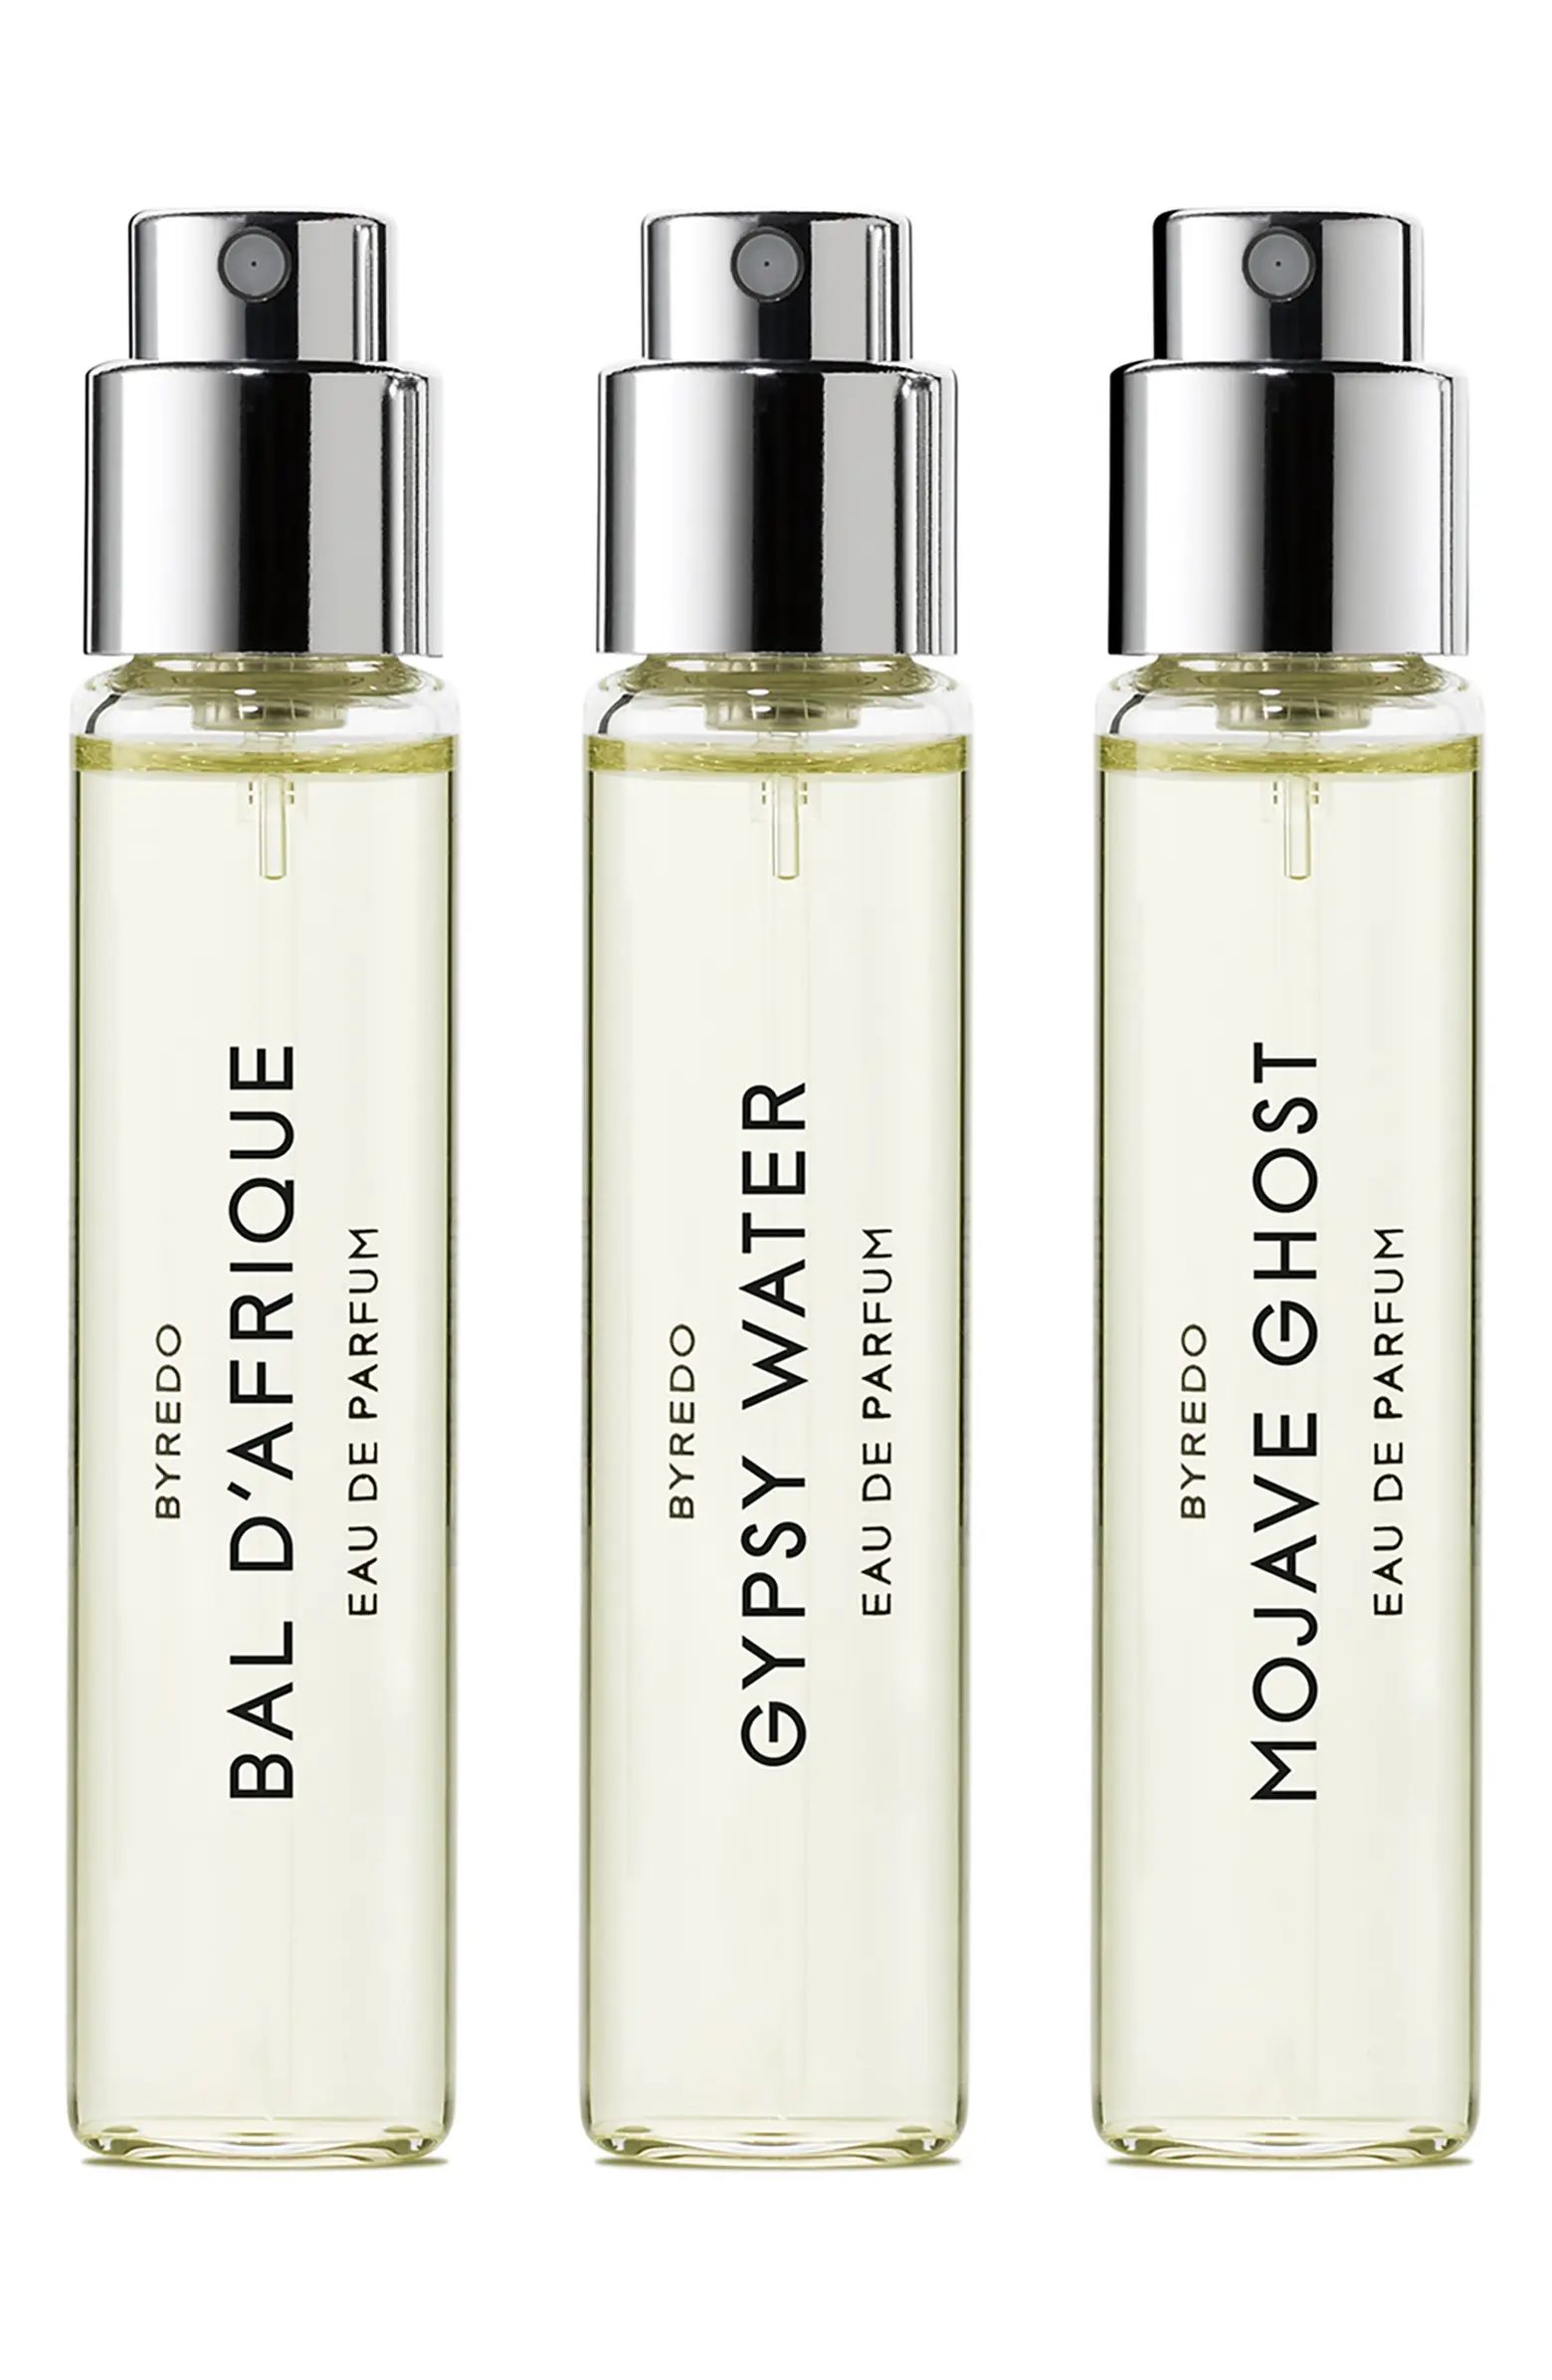 What it is: A Nordstrom-exclusive set of three iconic eau de parfum scents in travel sizes to try... | Nordstrom